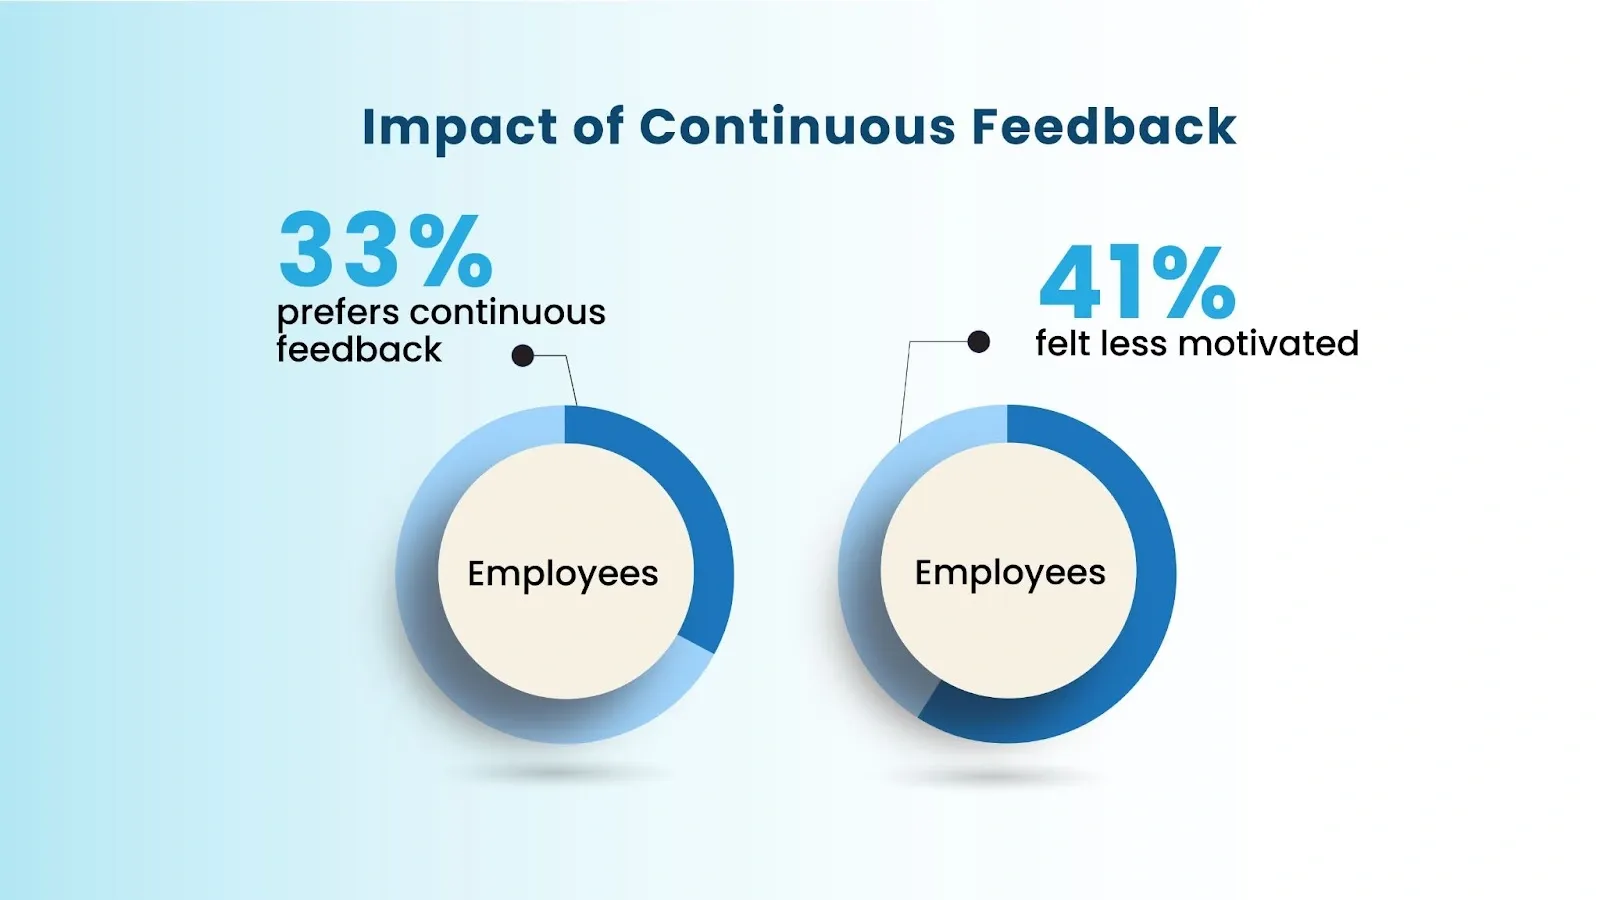 pie chart representing impact of Continuous Feedback